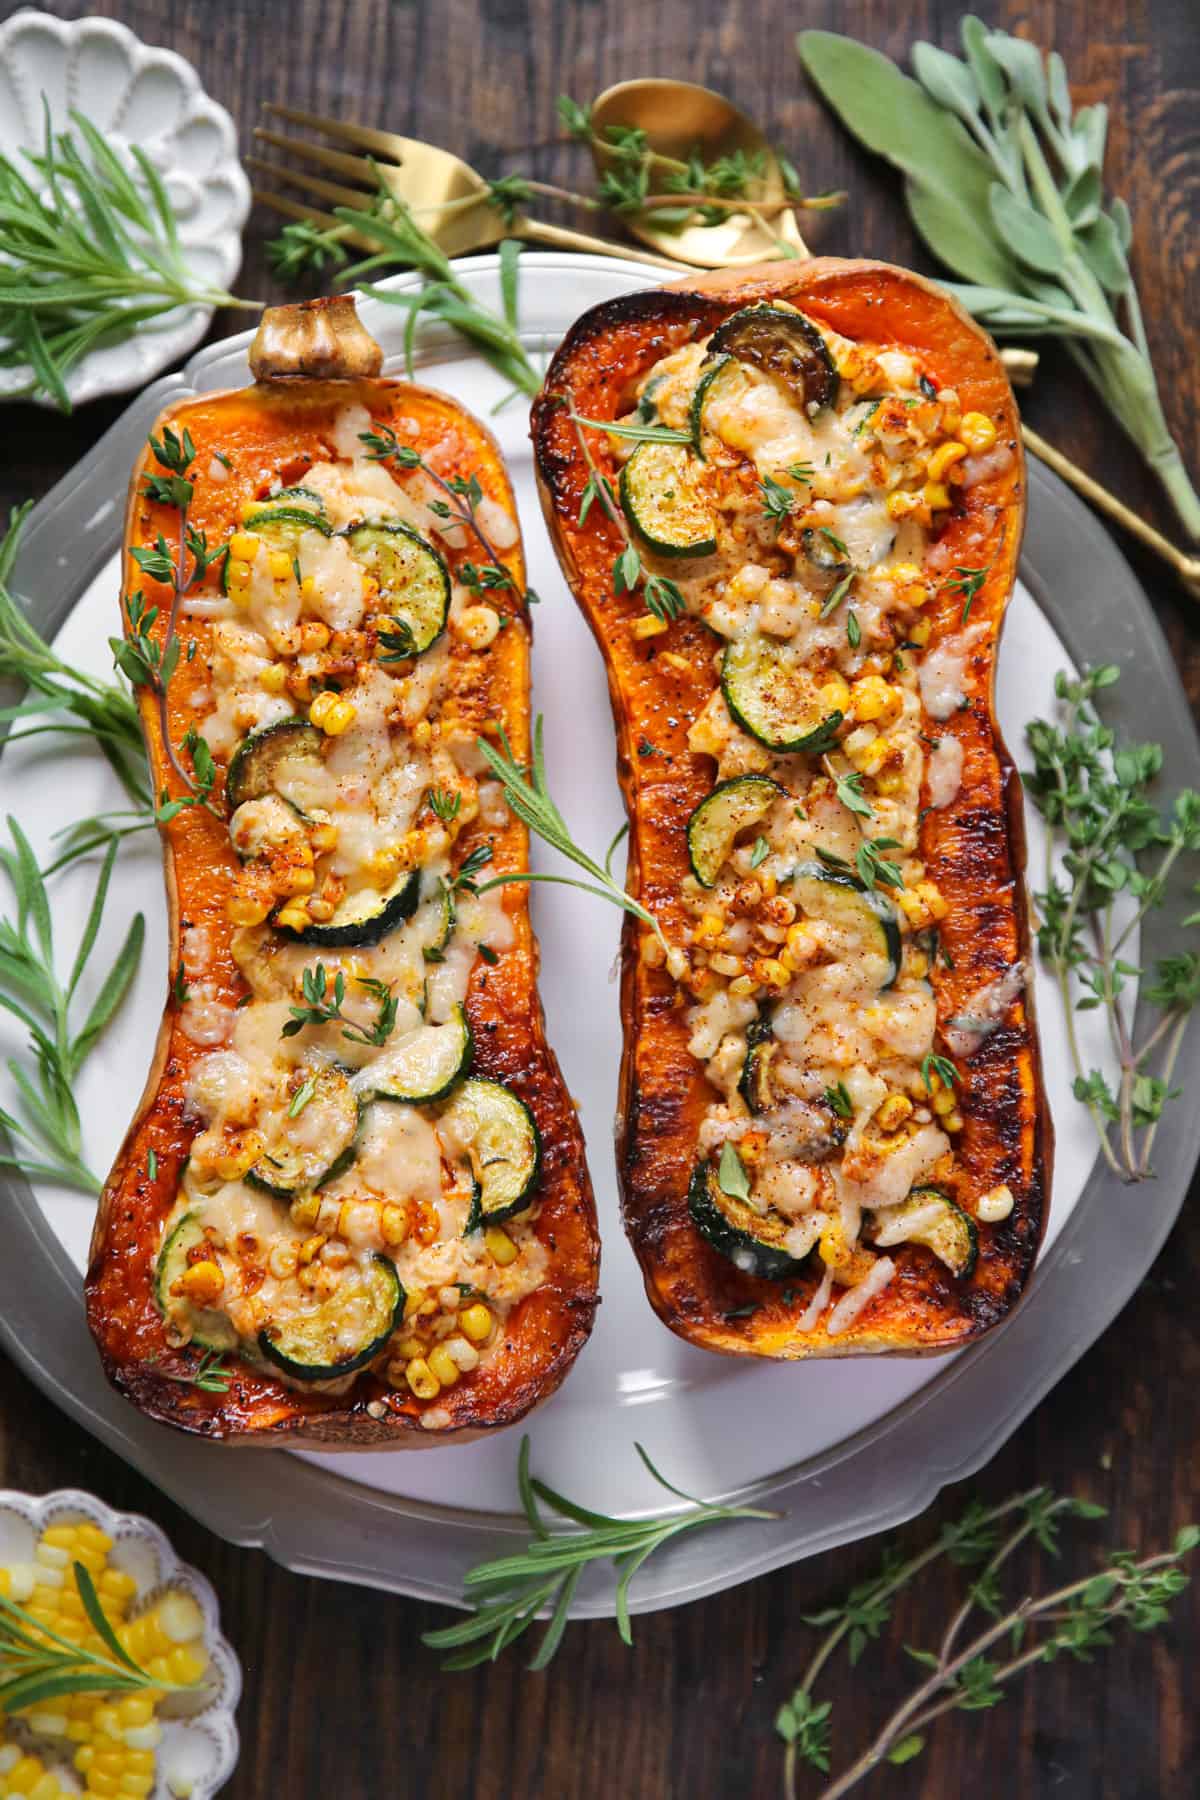 Roasted Butternut Squash (2 halves) stuffed with Corn, Zucchini, and Cheese - on a white plate.